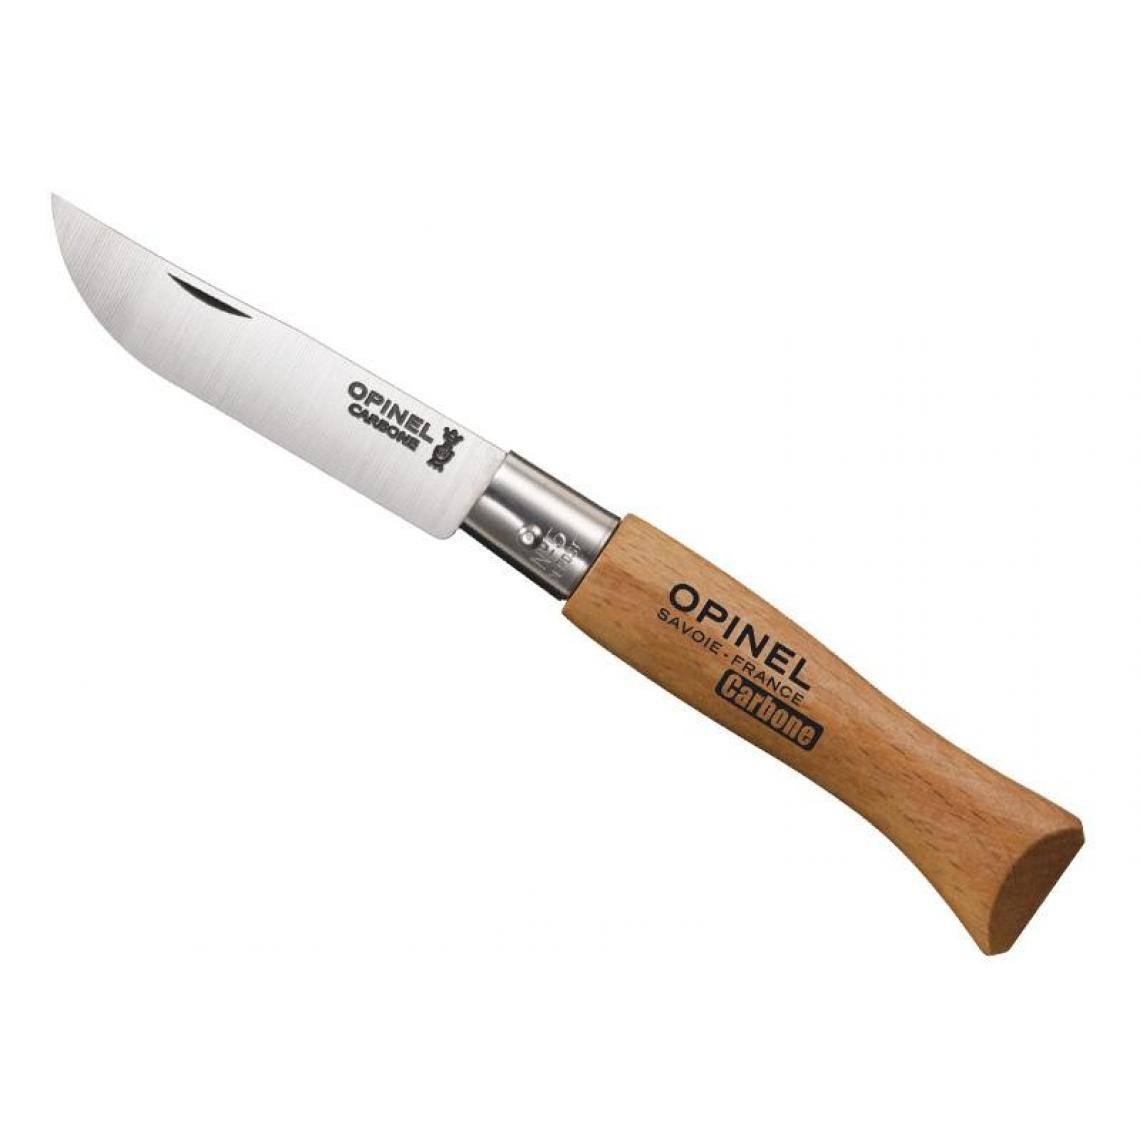 Opinel - OPINEL - 940.05 - BOITE 12 OPINEL N.5 CARBONE - Outils de coupe